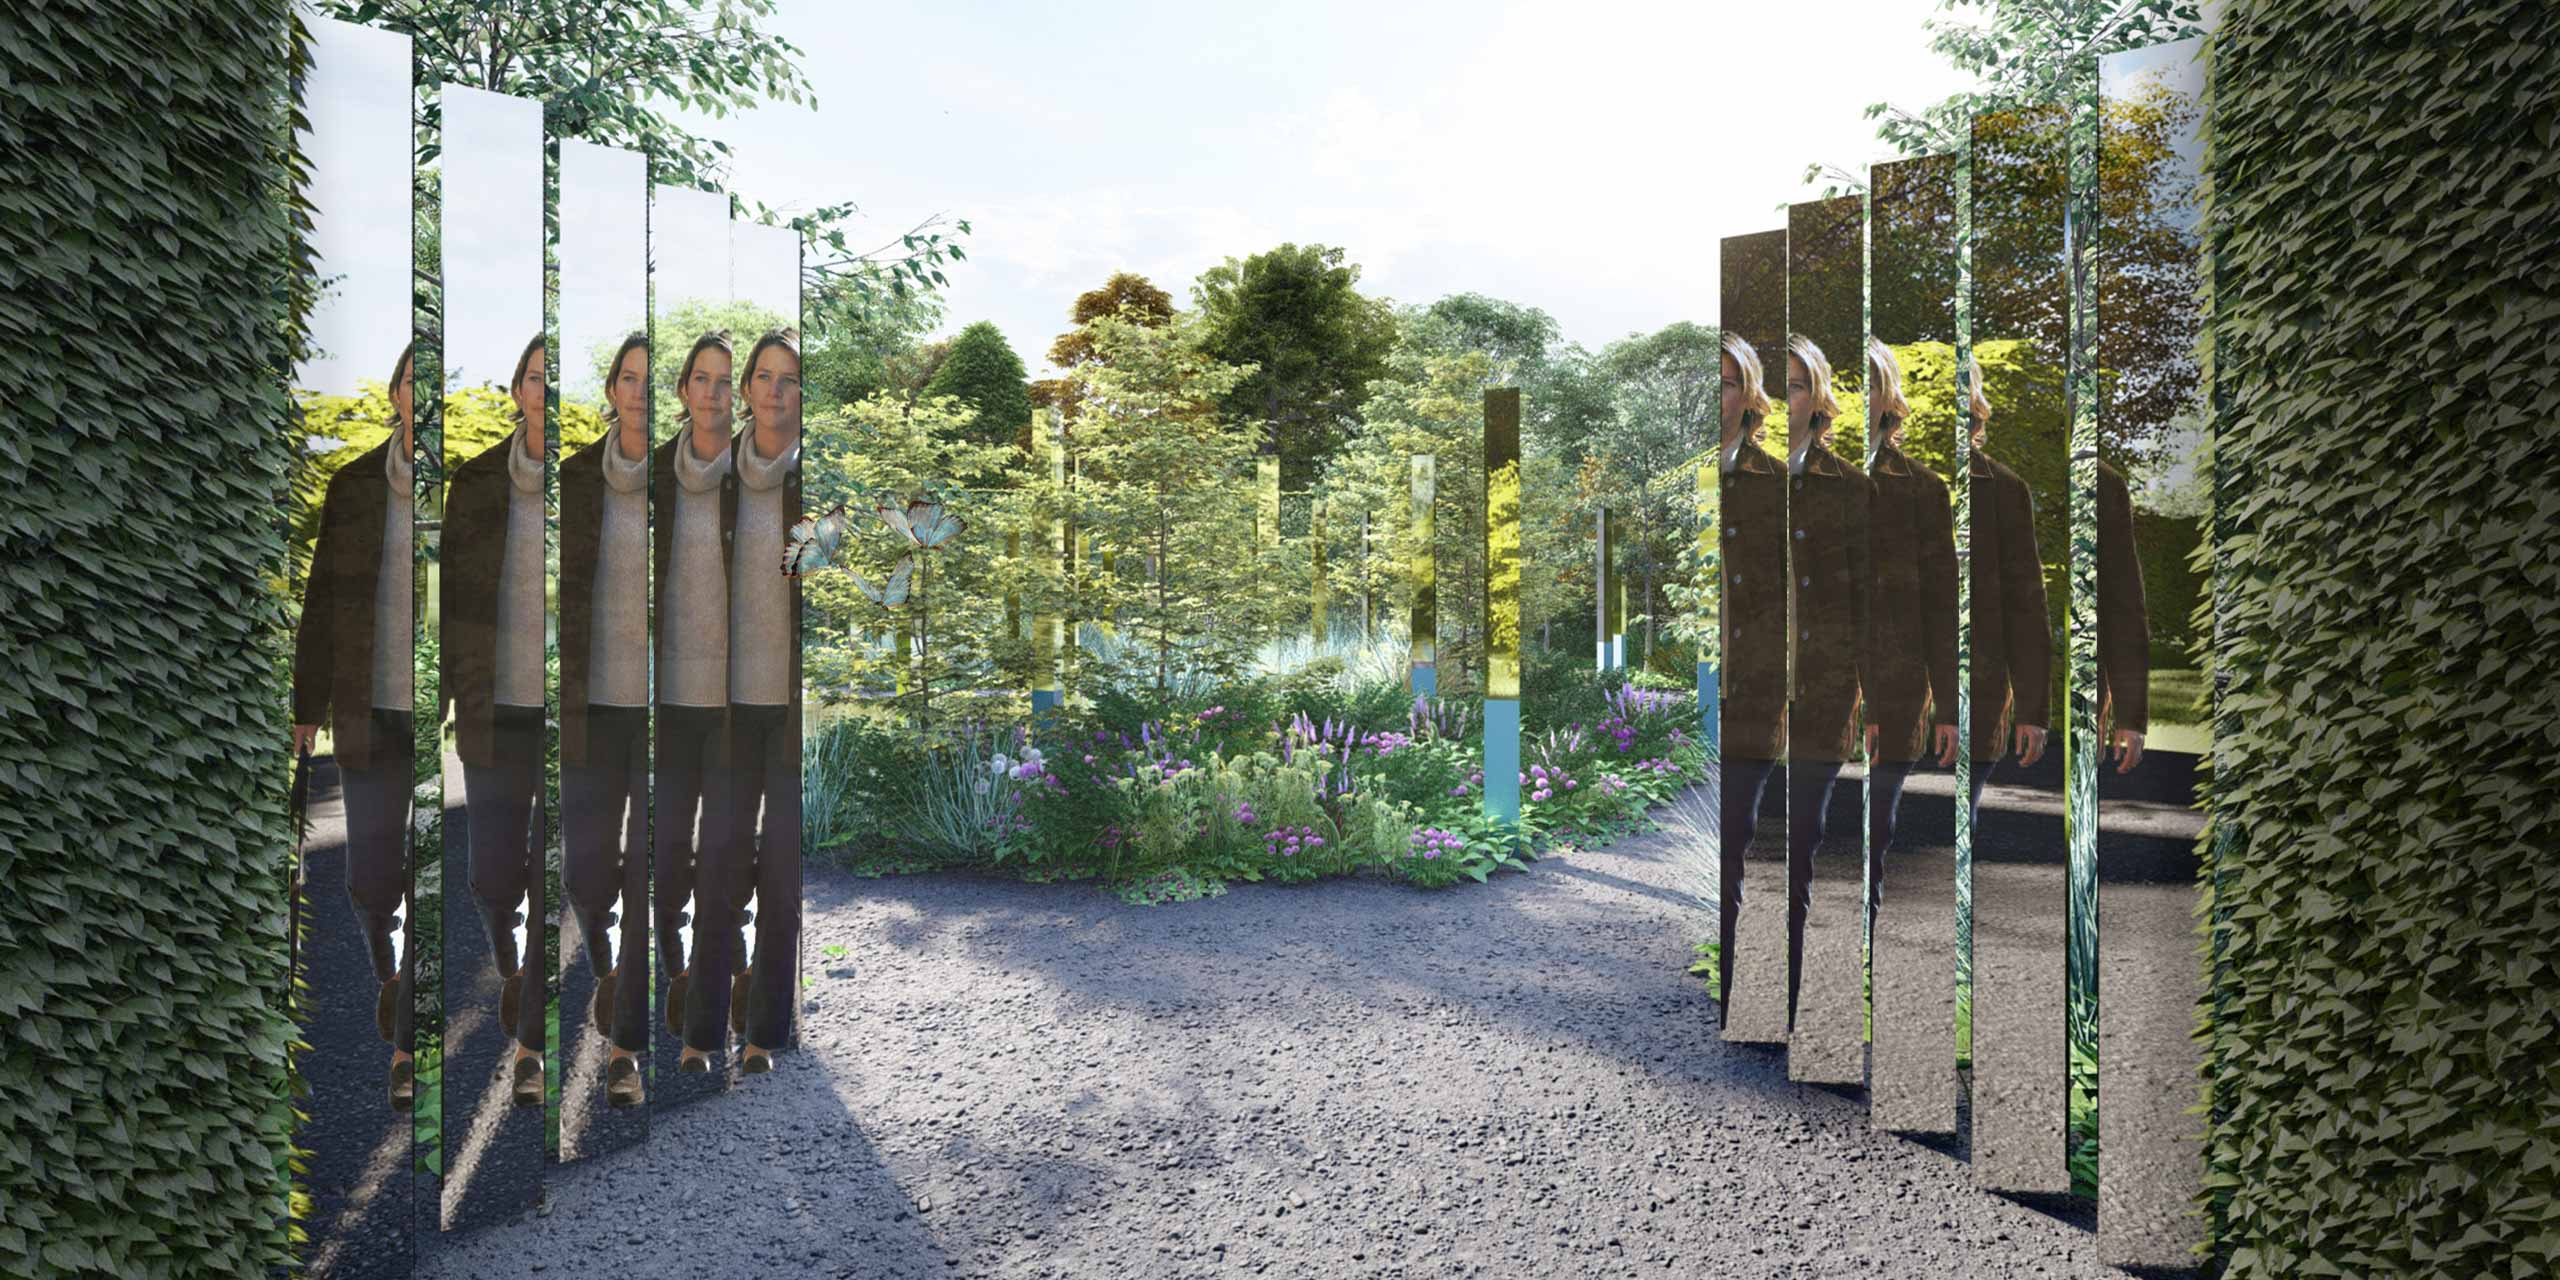 Rendering of the Garden of Reciprocity with reflective mirrors aligned in a row